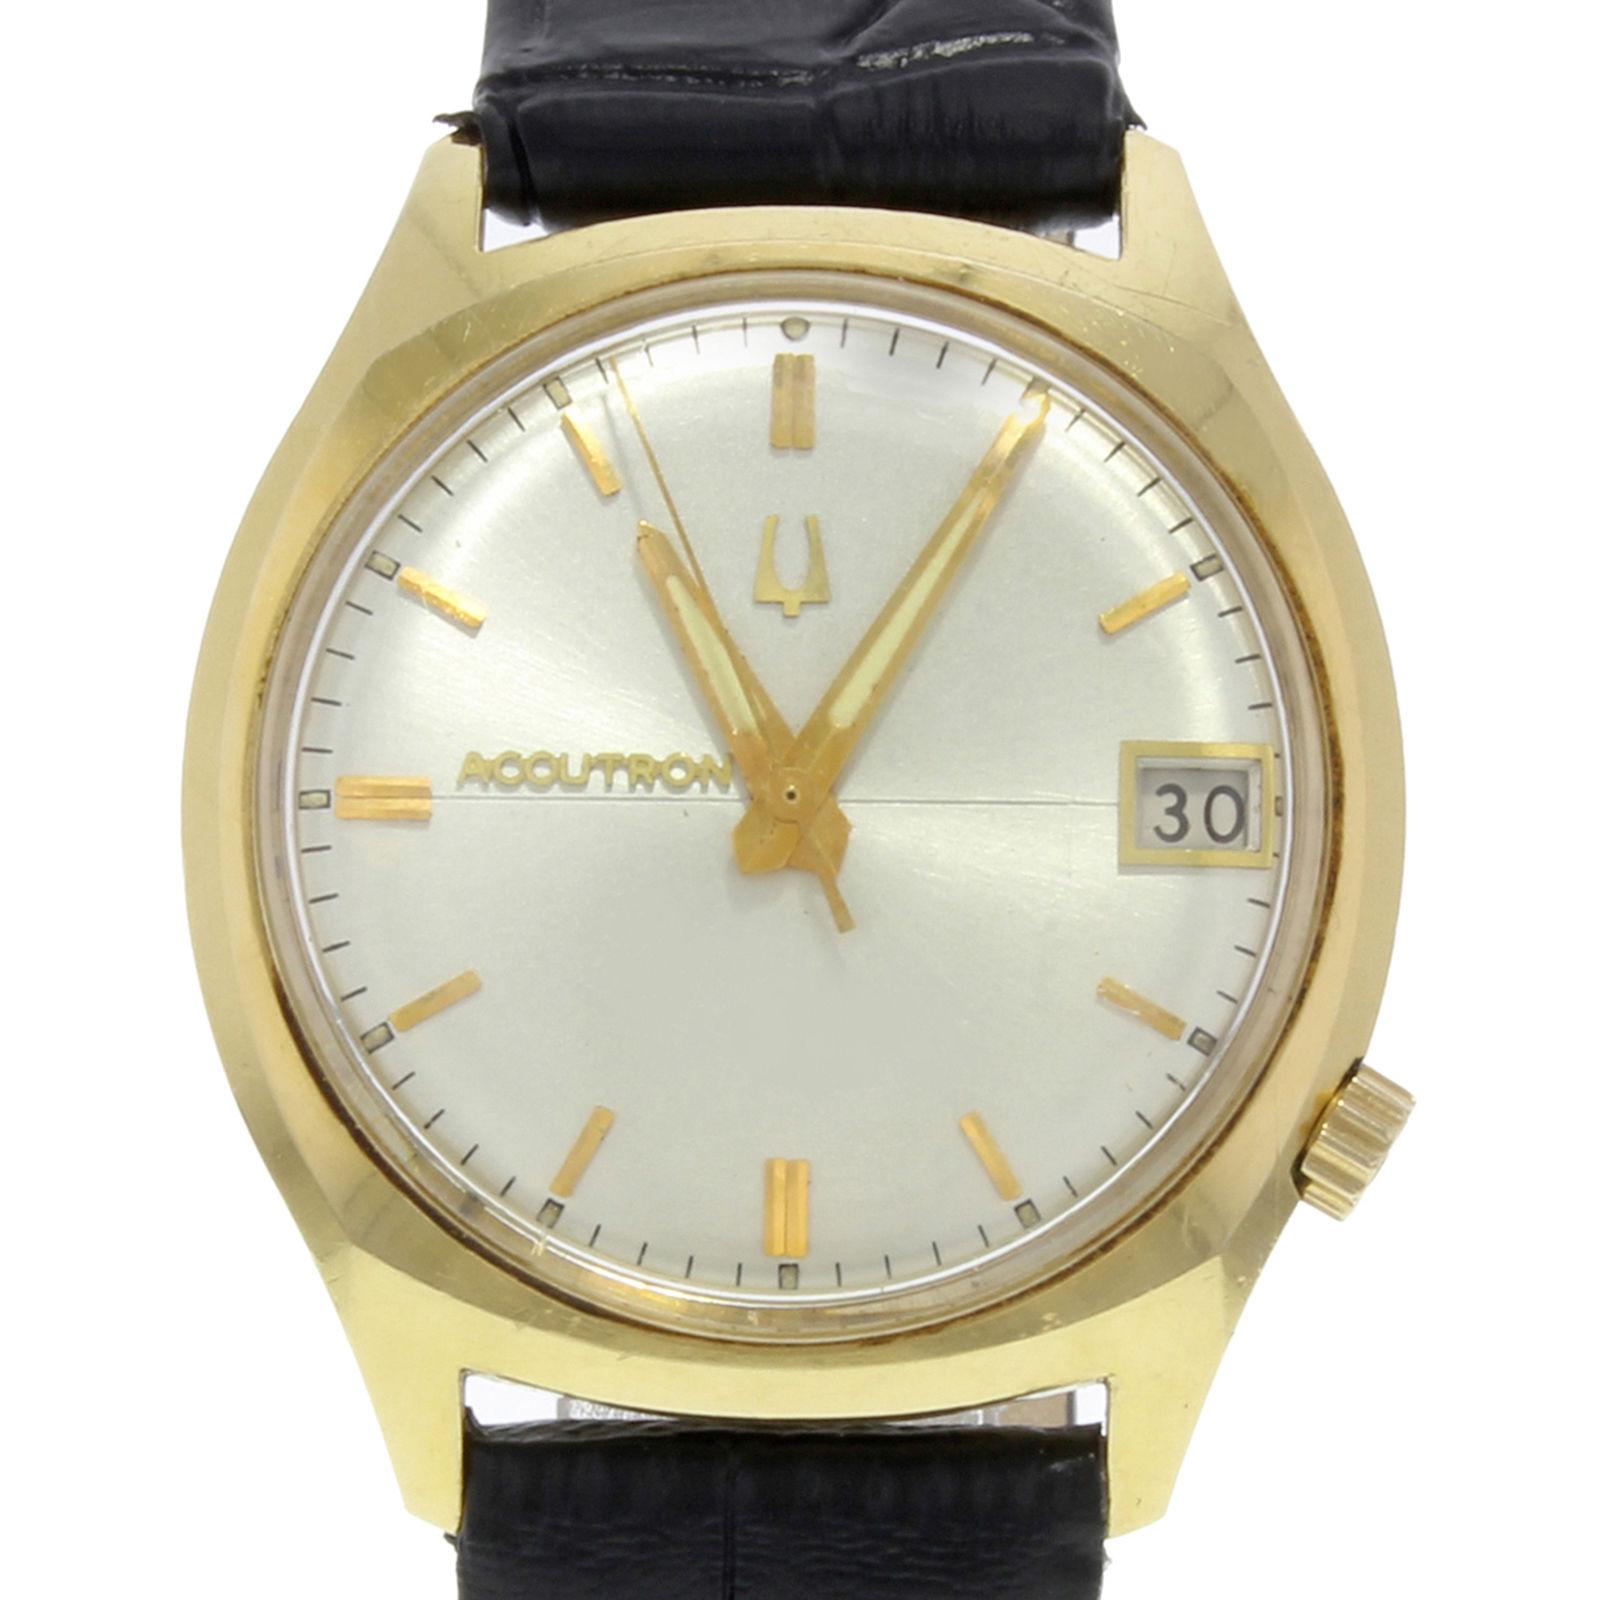 (18701)
This pre-owned Bulova Accutron N/A is a beautiful men's timepiece that is powered by a quartz movement which is cased in a yellow gold case. It has a round shape face, date dial and has hand sticks style markers. It is completed with a